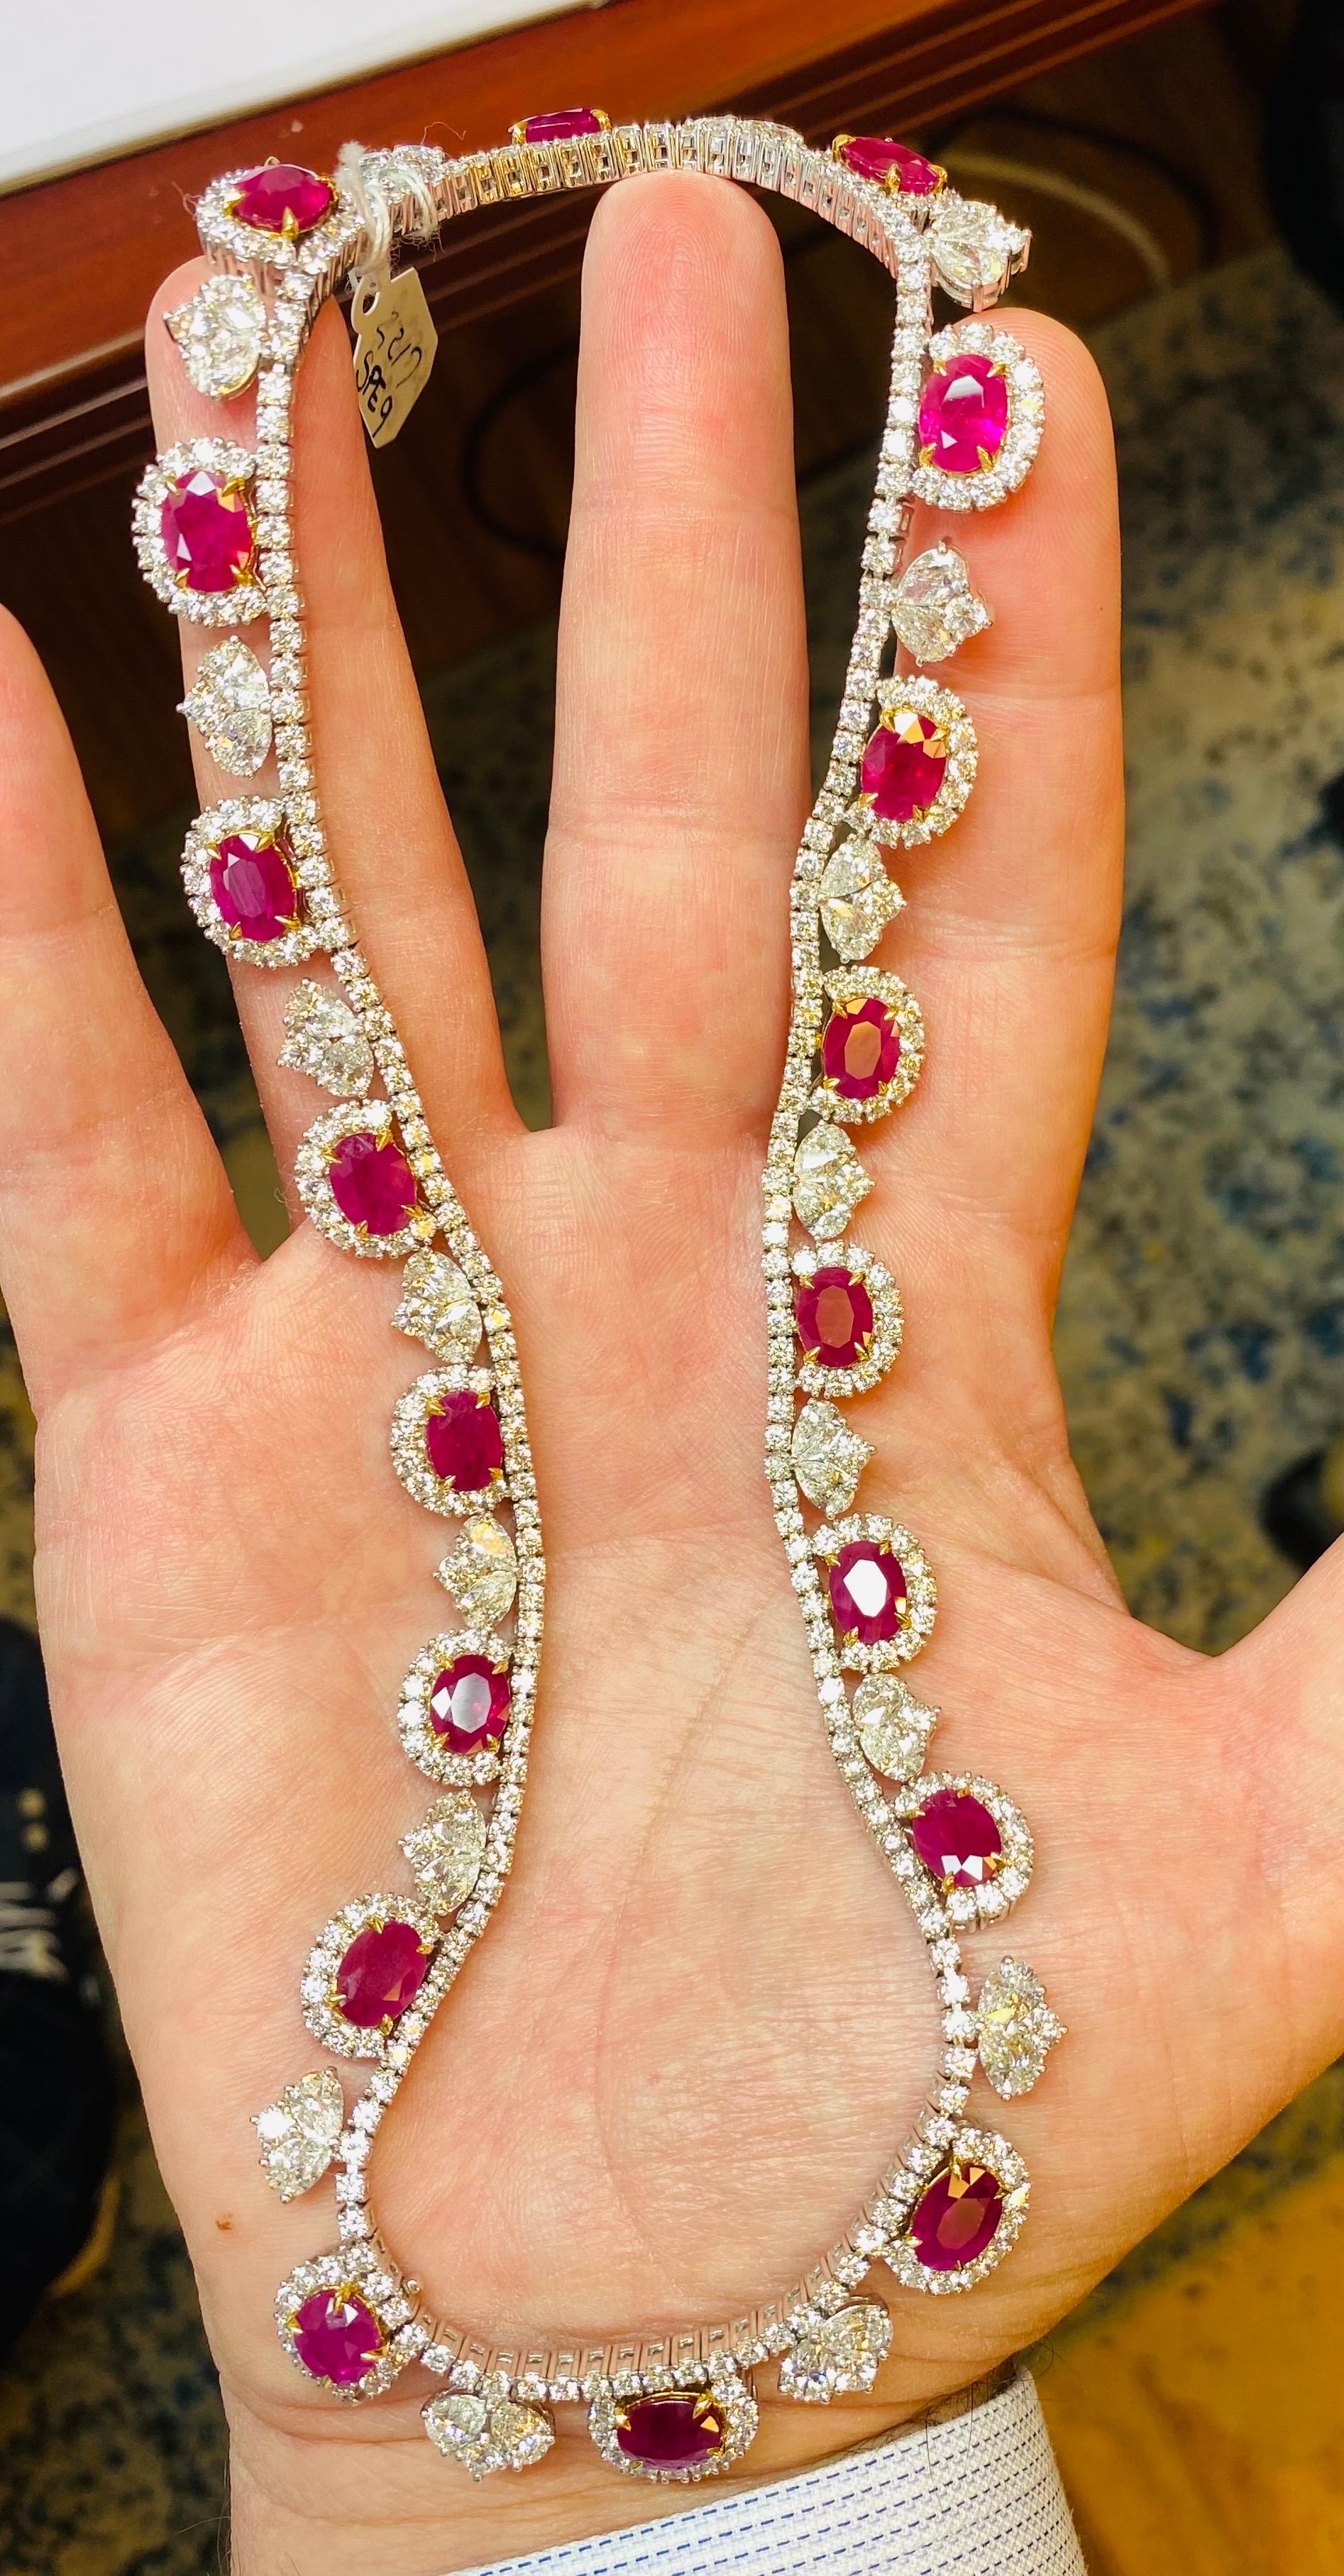 From Emilio Jewelry, a well known and respected wholesaler/dealer located on New York’s iconic Fifth Avenue, 
This is a necklace and bracelet sold together, however we are happy to sell either one should you not require both pieces. 
Each Ruby has